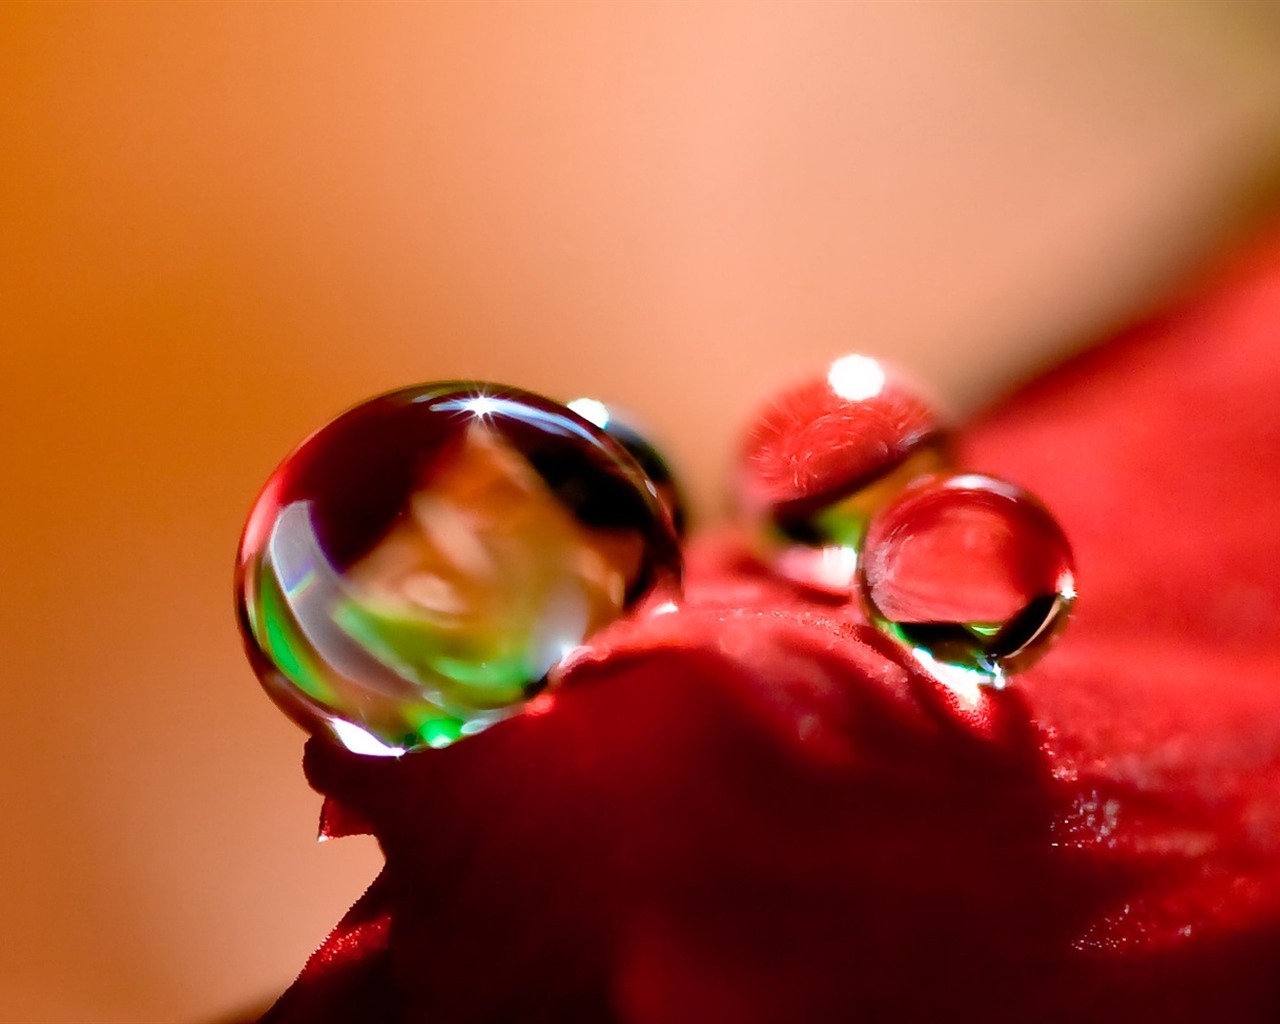 HD wallpaper flowers and drops of water #4 - 1280x1024